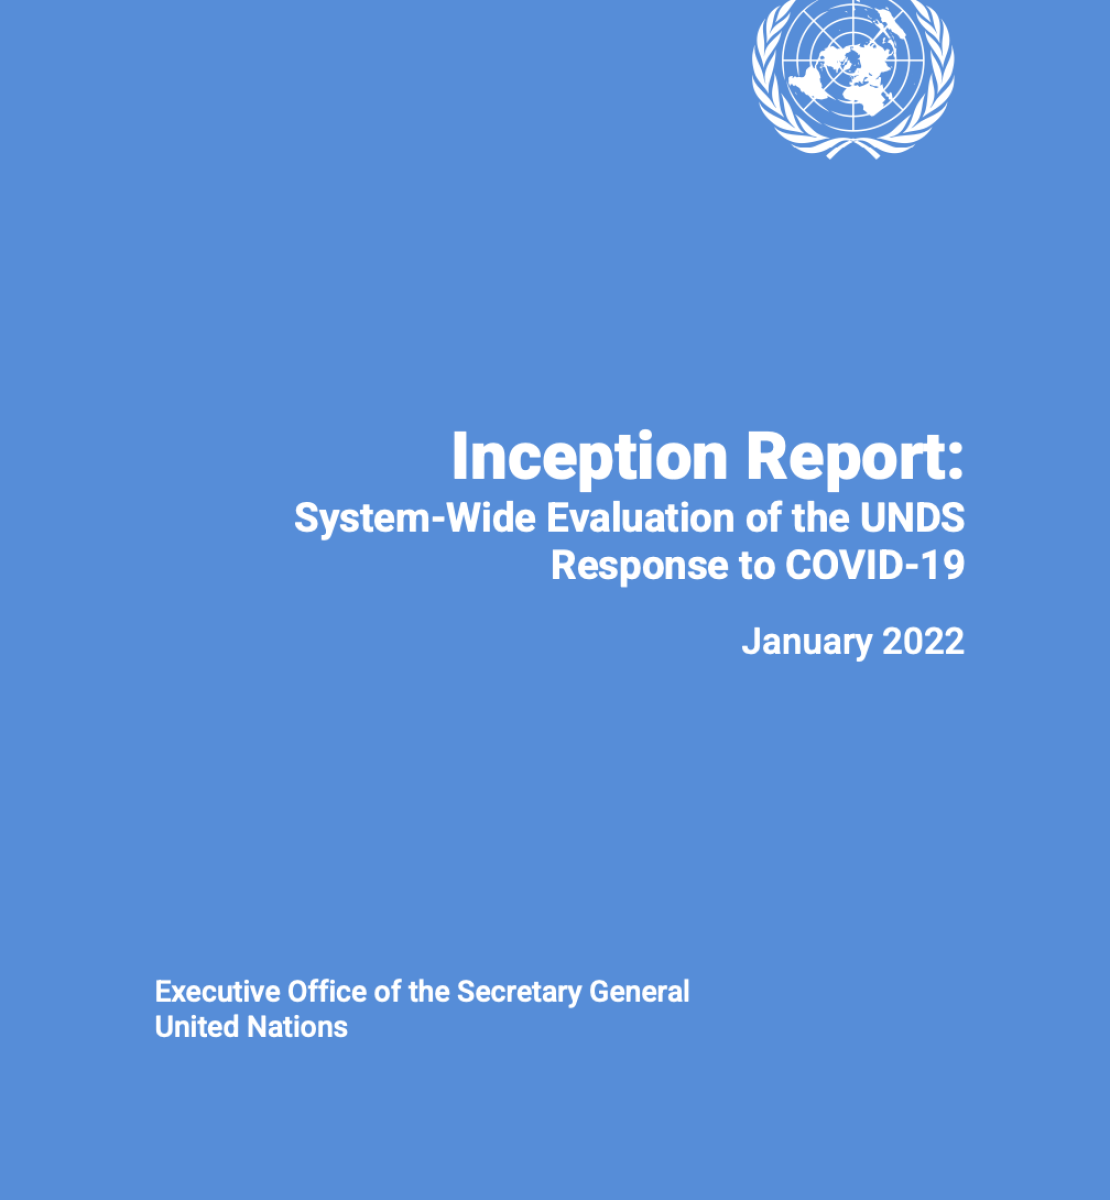 A blue cover with the United Nations and the title: Inception Report: System-Wide Evaluation of the UNDS Response to COVID-19 in English